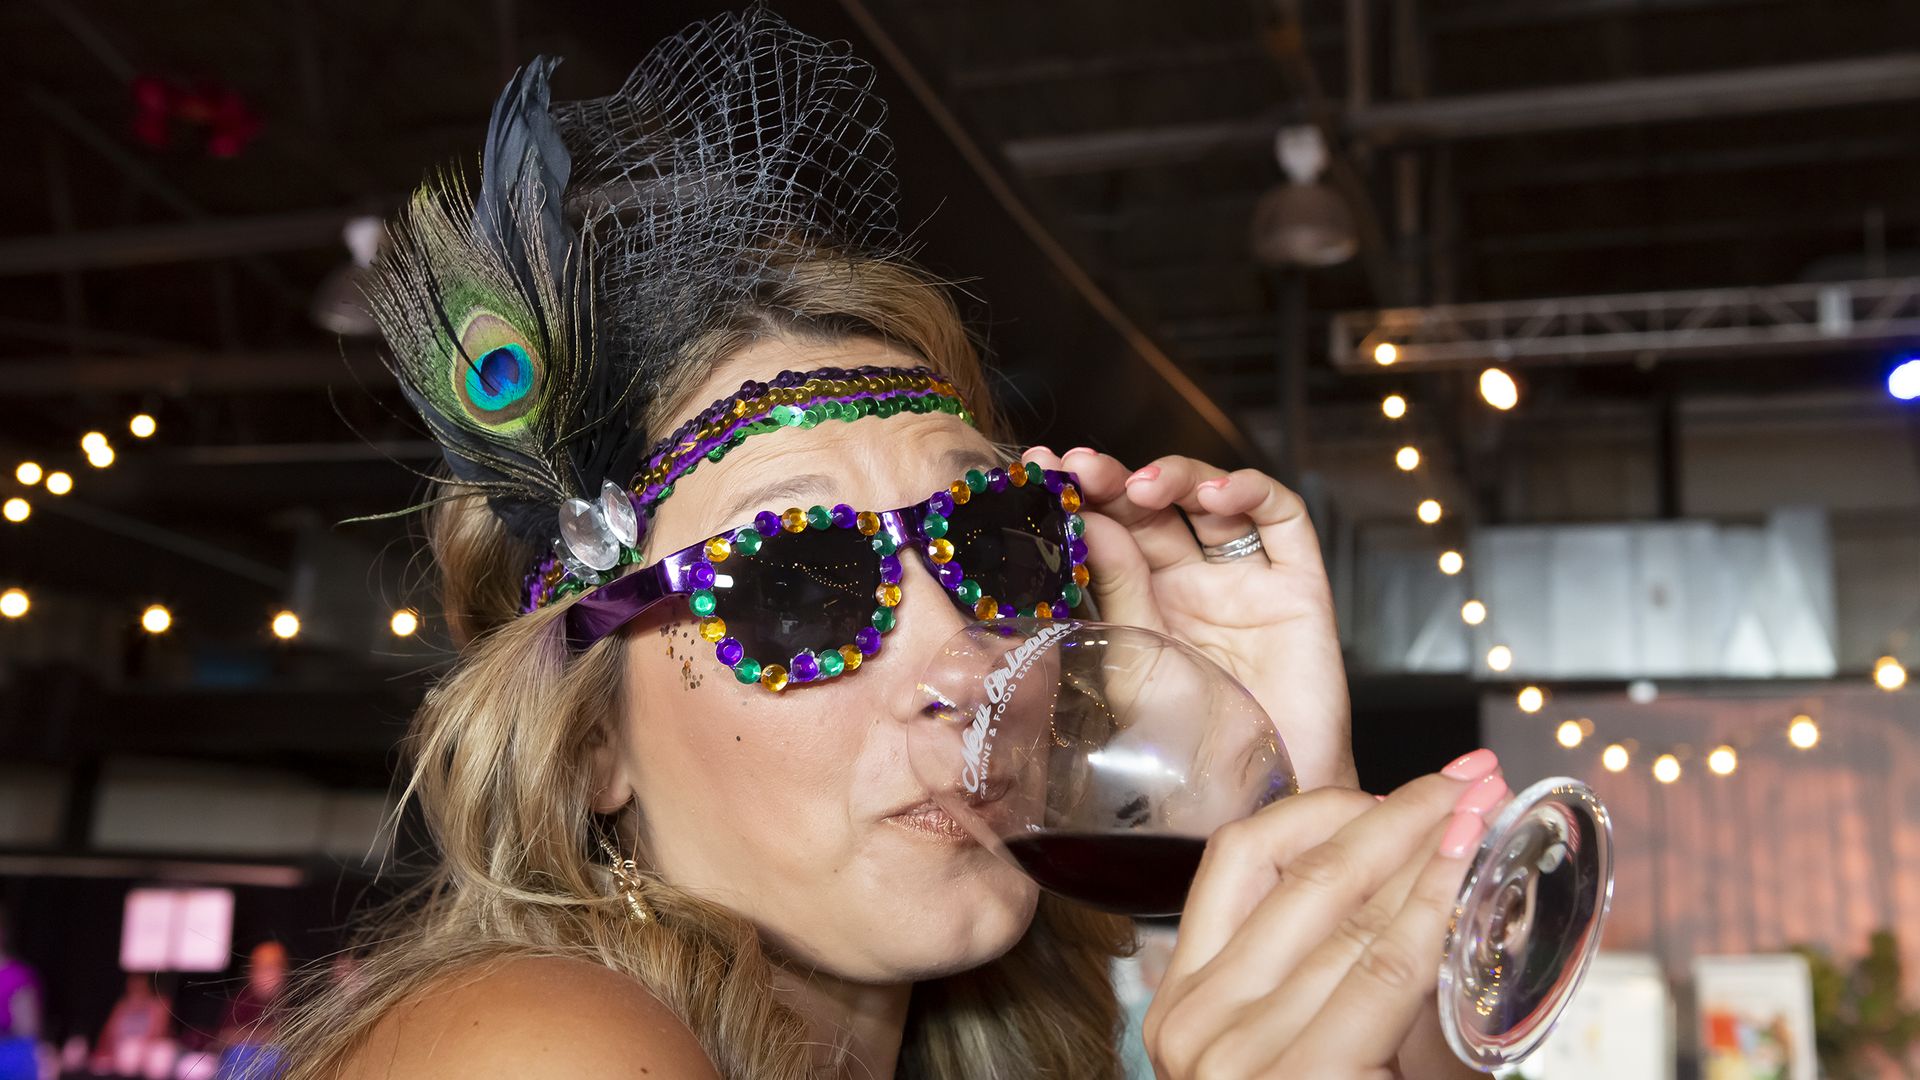 A woman sips a glass of red wine. She's wearing purple sunglasses bedazzled with purple, good and green jewels, and wearing a sequin headband with an ostrich feather.